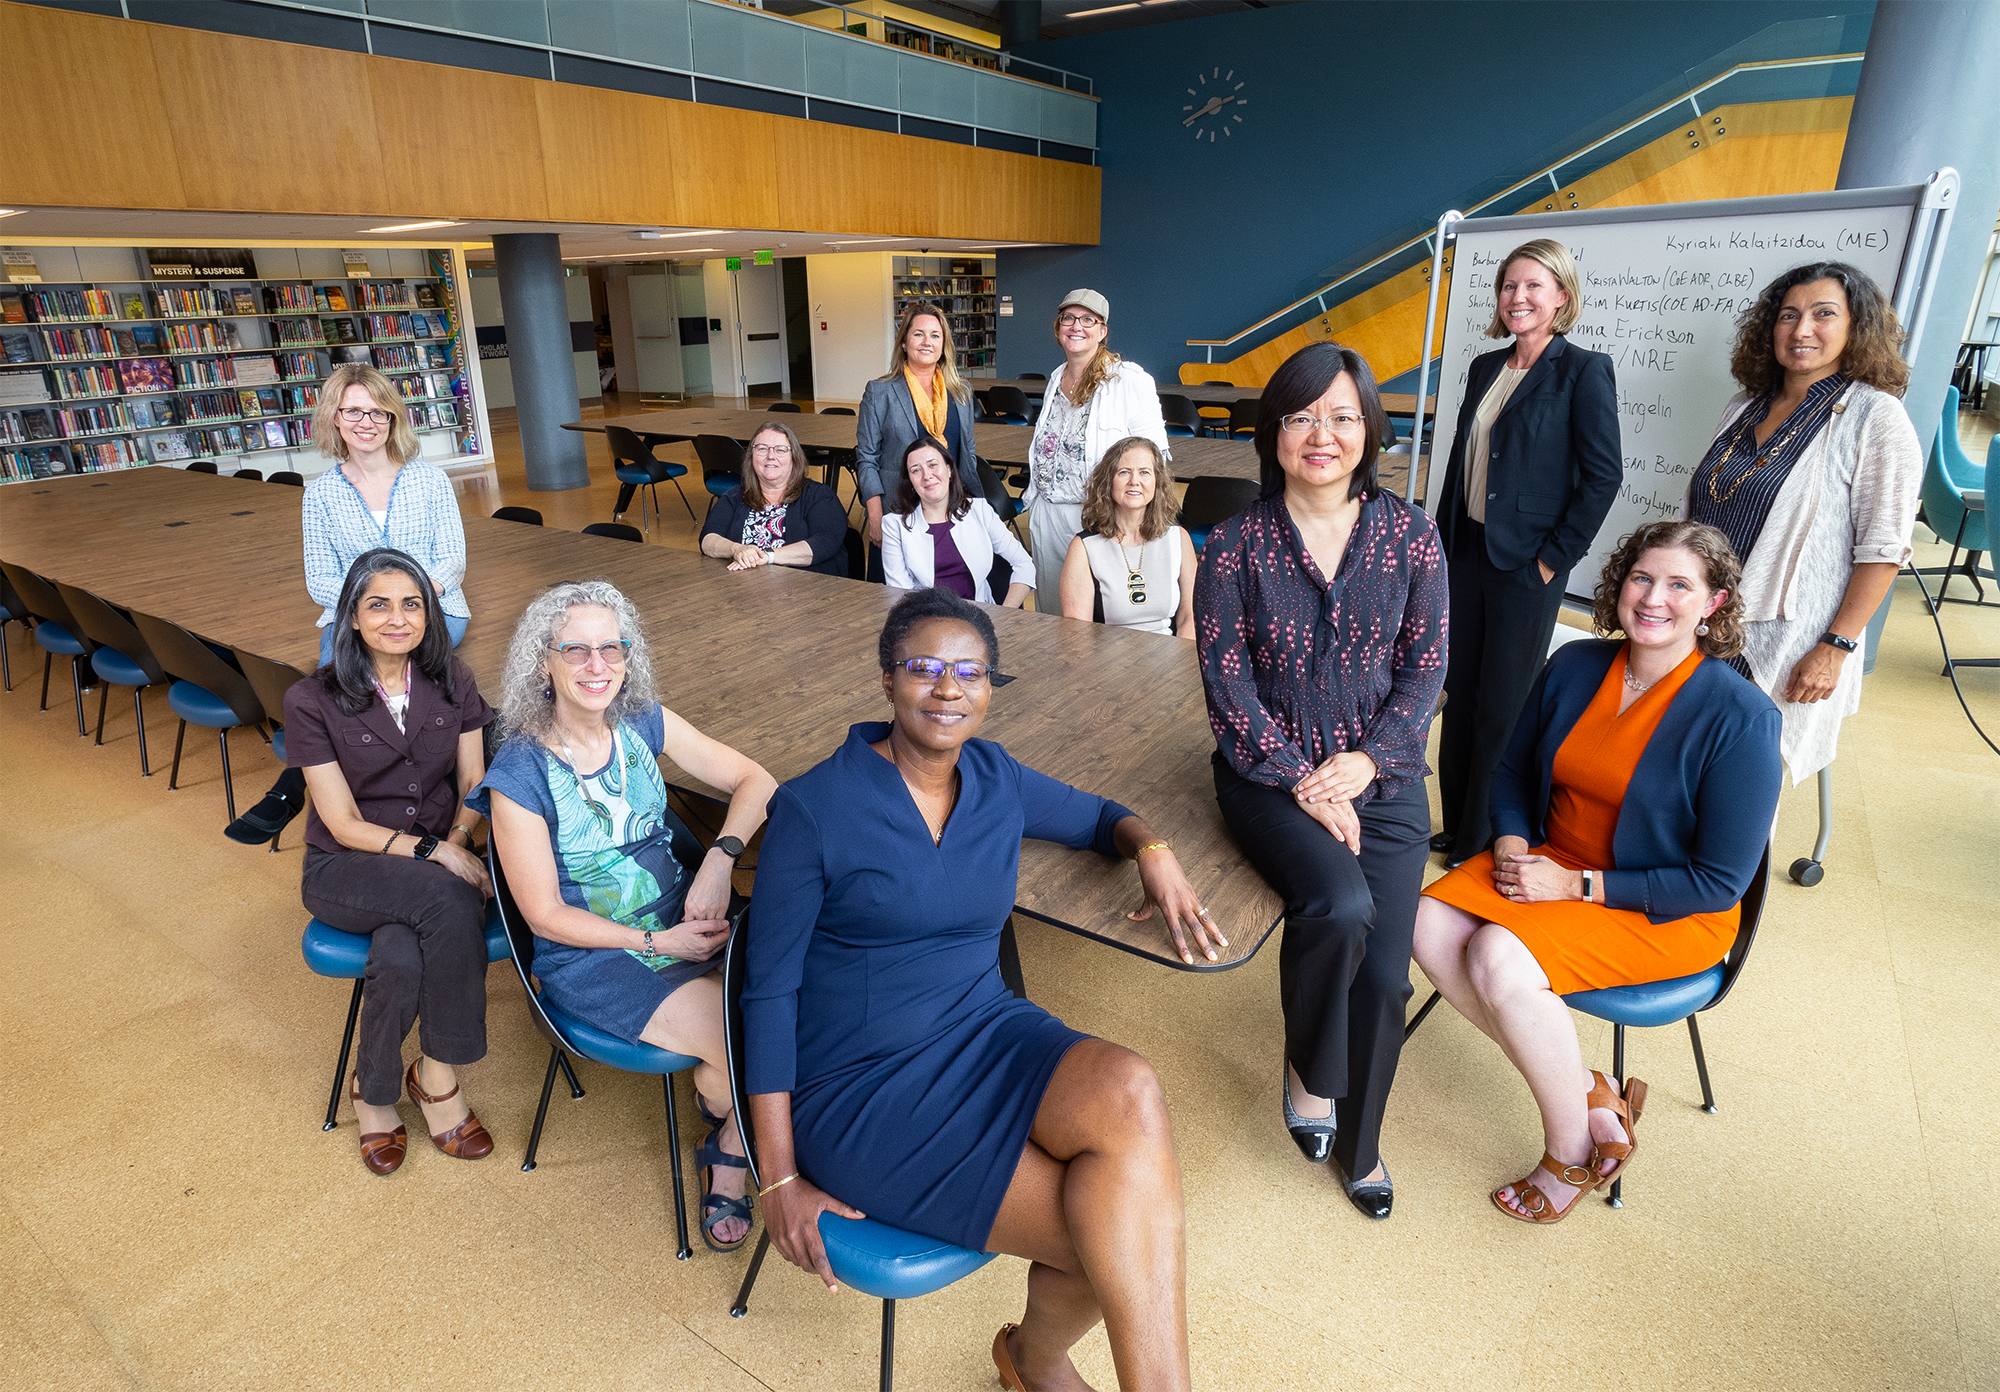 A group picture of 14 women holding leadership positions in the College of Engineering gathered around a table in the library